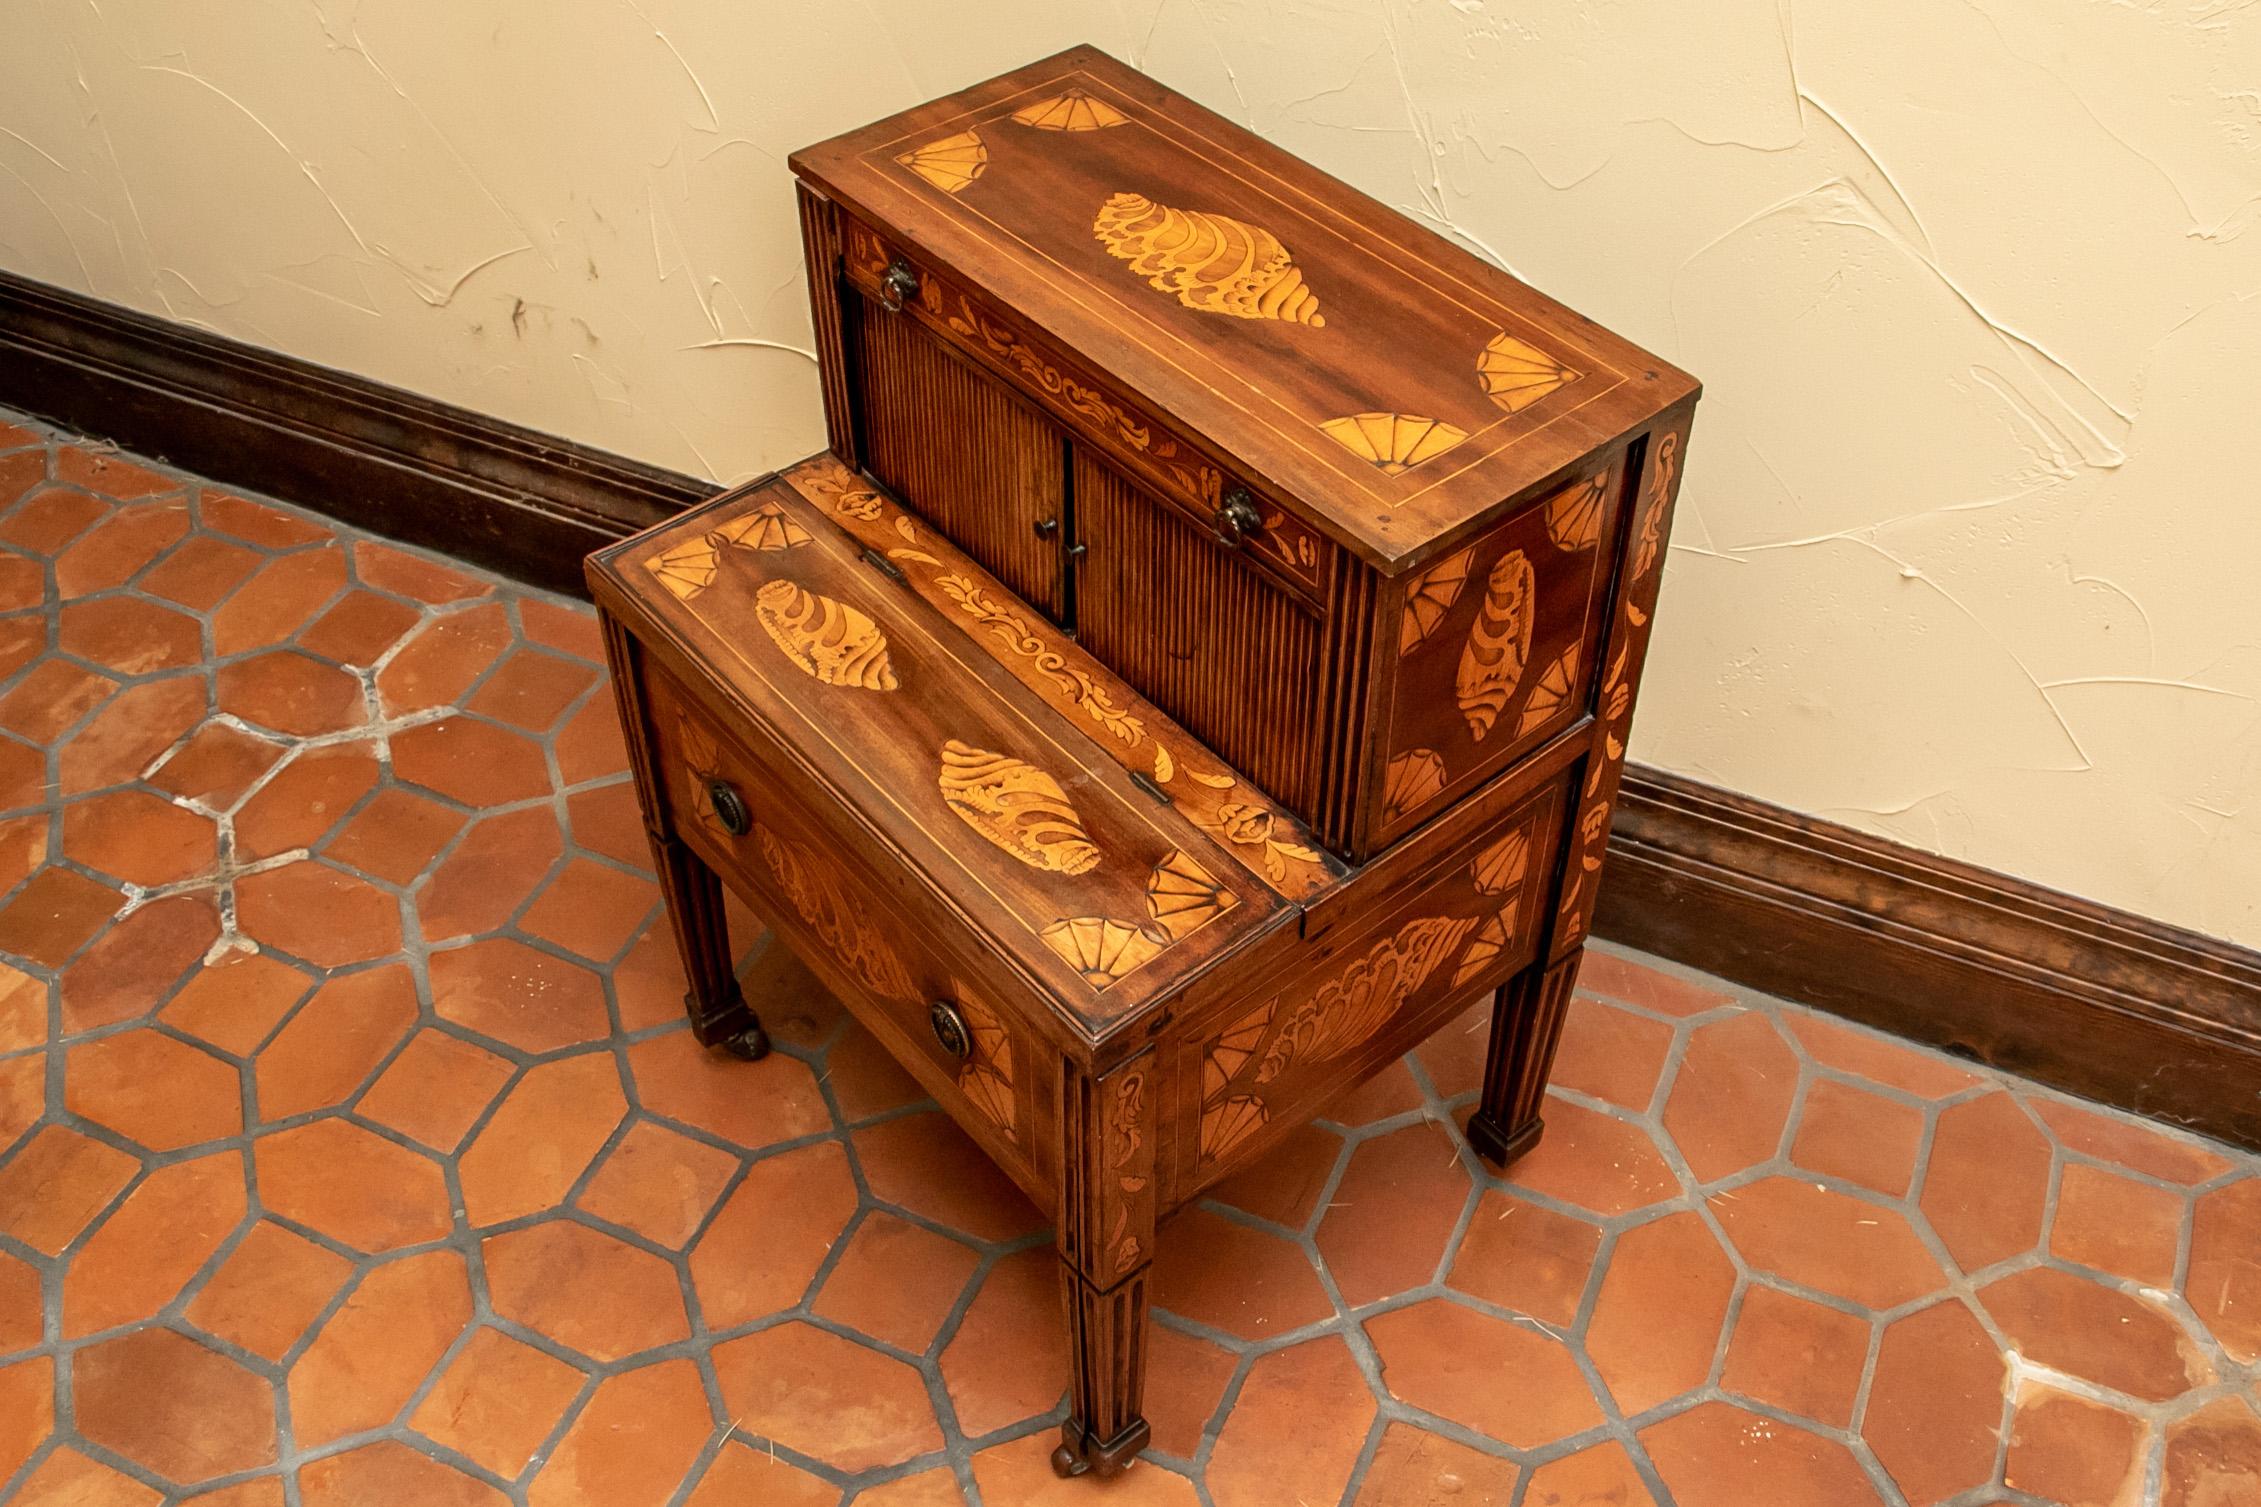 19th century commode, walnut with contrasting shell, scroll and floral form inlaid veneer, top with long narrow drawer over two tambour doors that slide open to reveal a large storage compartment, lower portion with flip-top and large drawer that